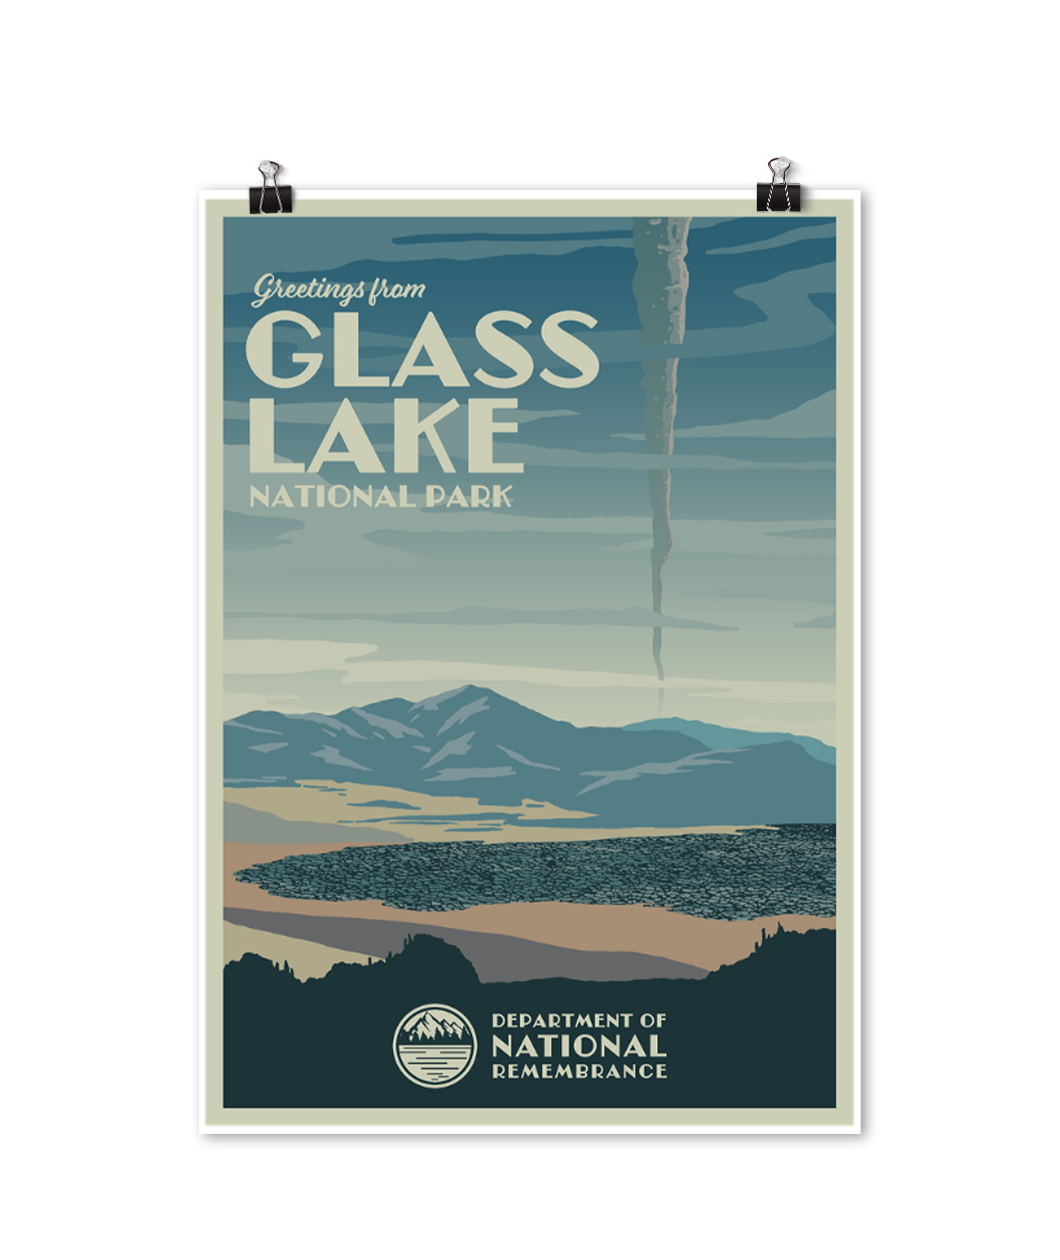 Poster based on the National Parks posters. Features illustration of Glass Lake with plume of smoke emitting from the mountains in the distance. Text: 